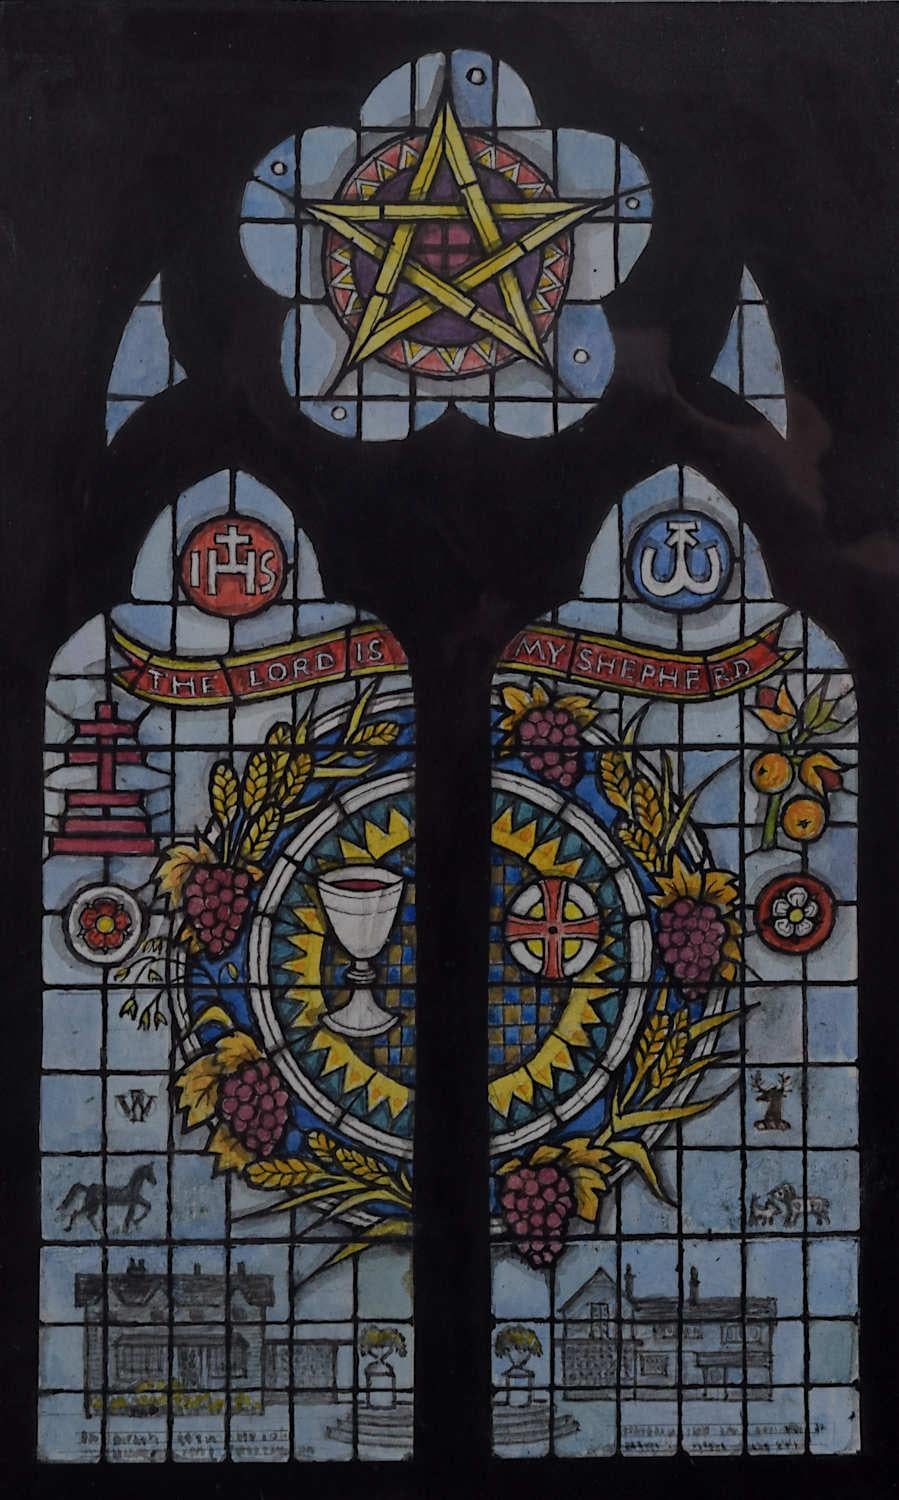 We acquired a series of watercolour stained glass designs from Jane Gray's studio. To find more scroll down to "More from this Seller" and below it click on "See all from this seller." 

Jane Gray (b.1931)
Stained Glass Design
Watercolour
21 x 12.5